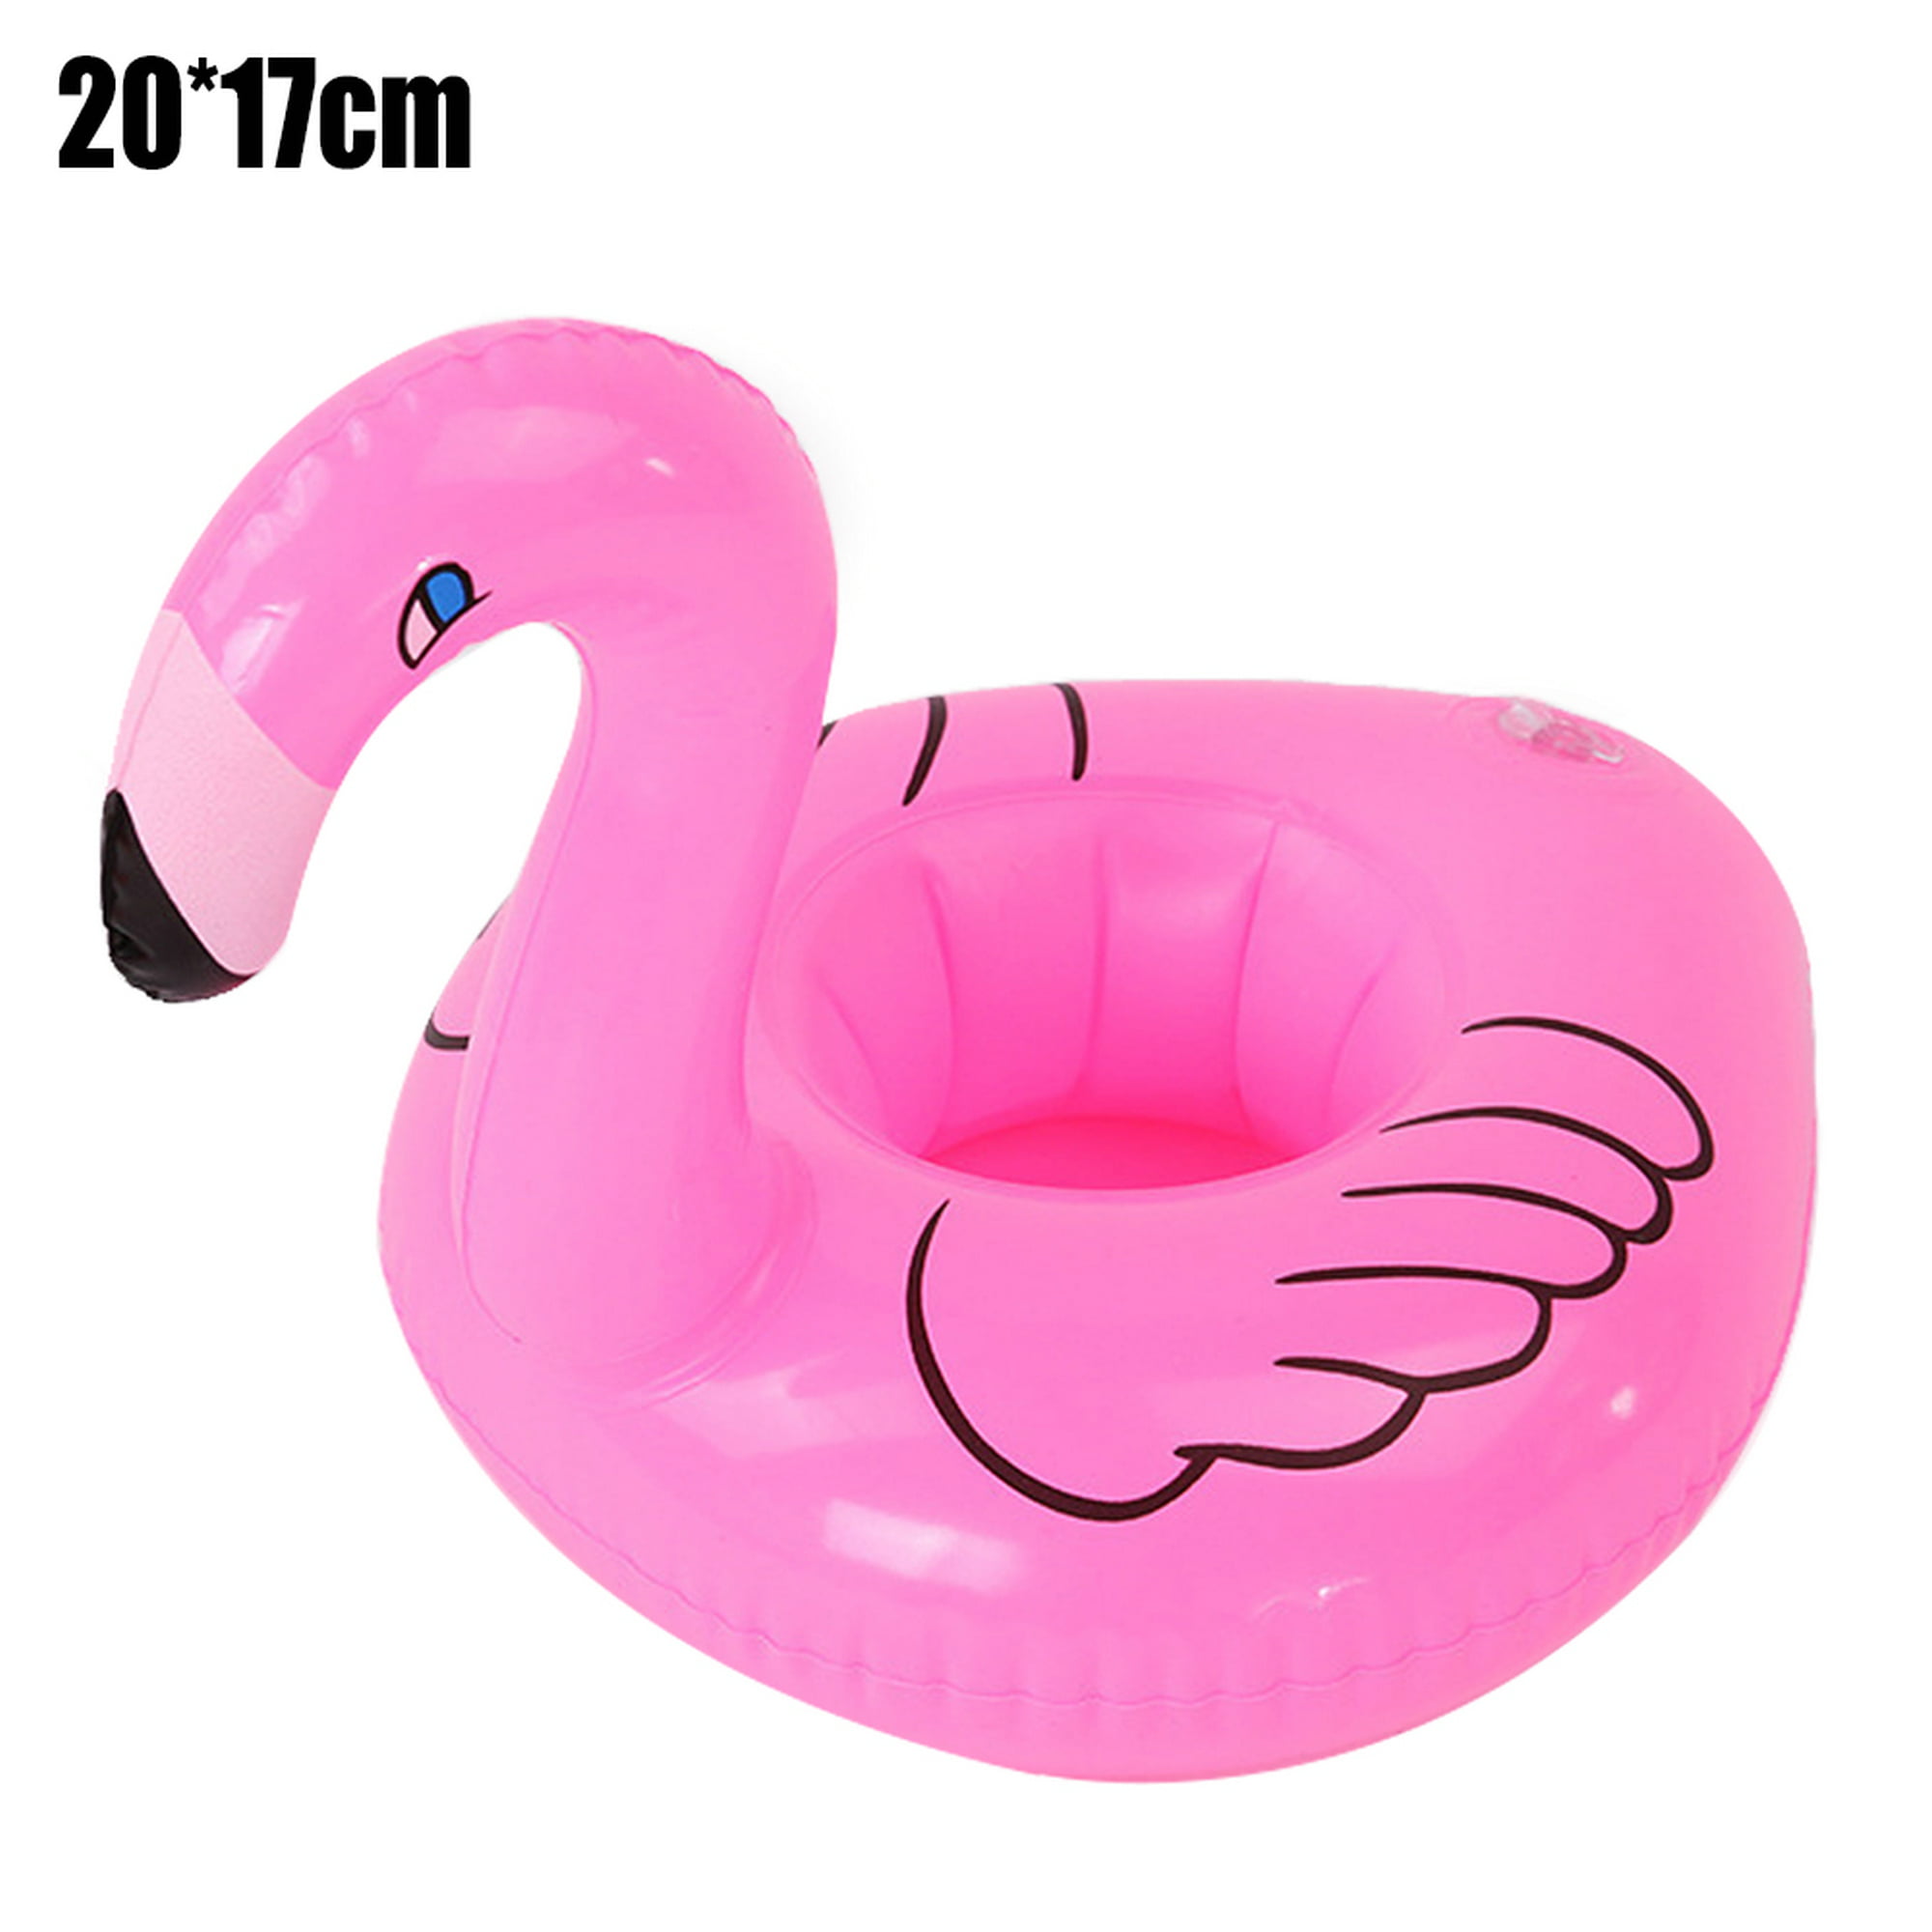 Details about   Inflatable Drinks Holder Floating Can Cup Hot Tub Swimming Pool Beach Party Toys 